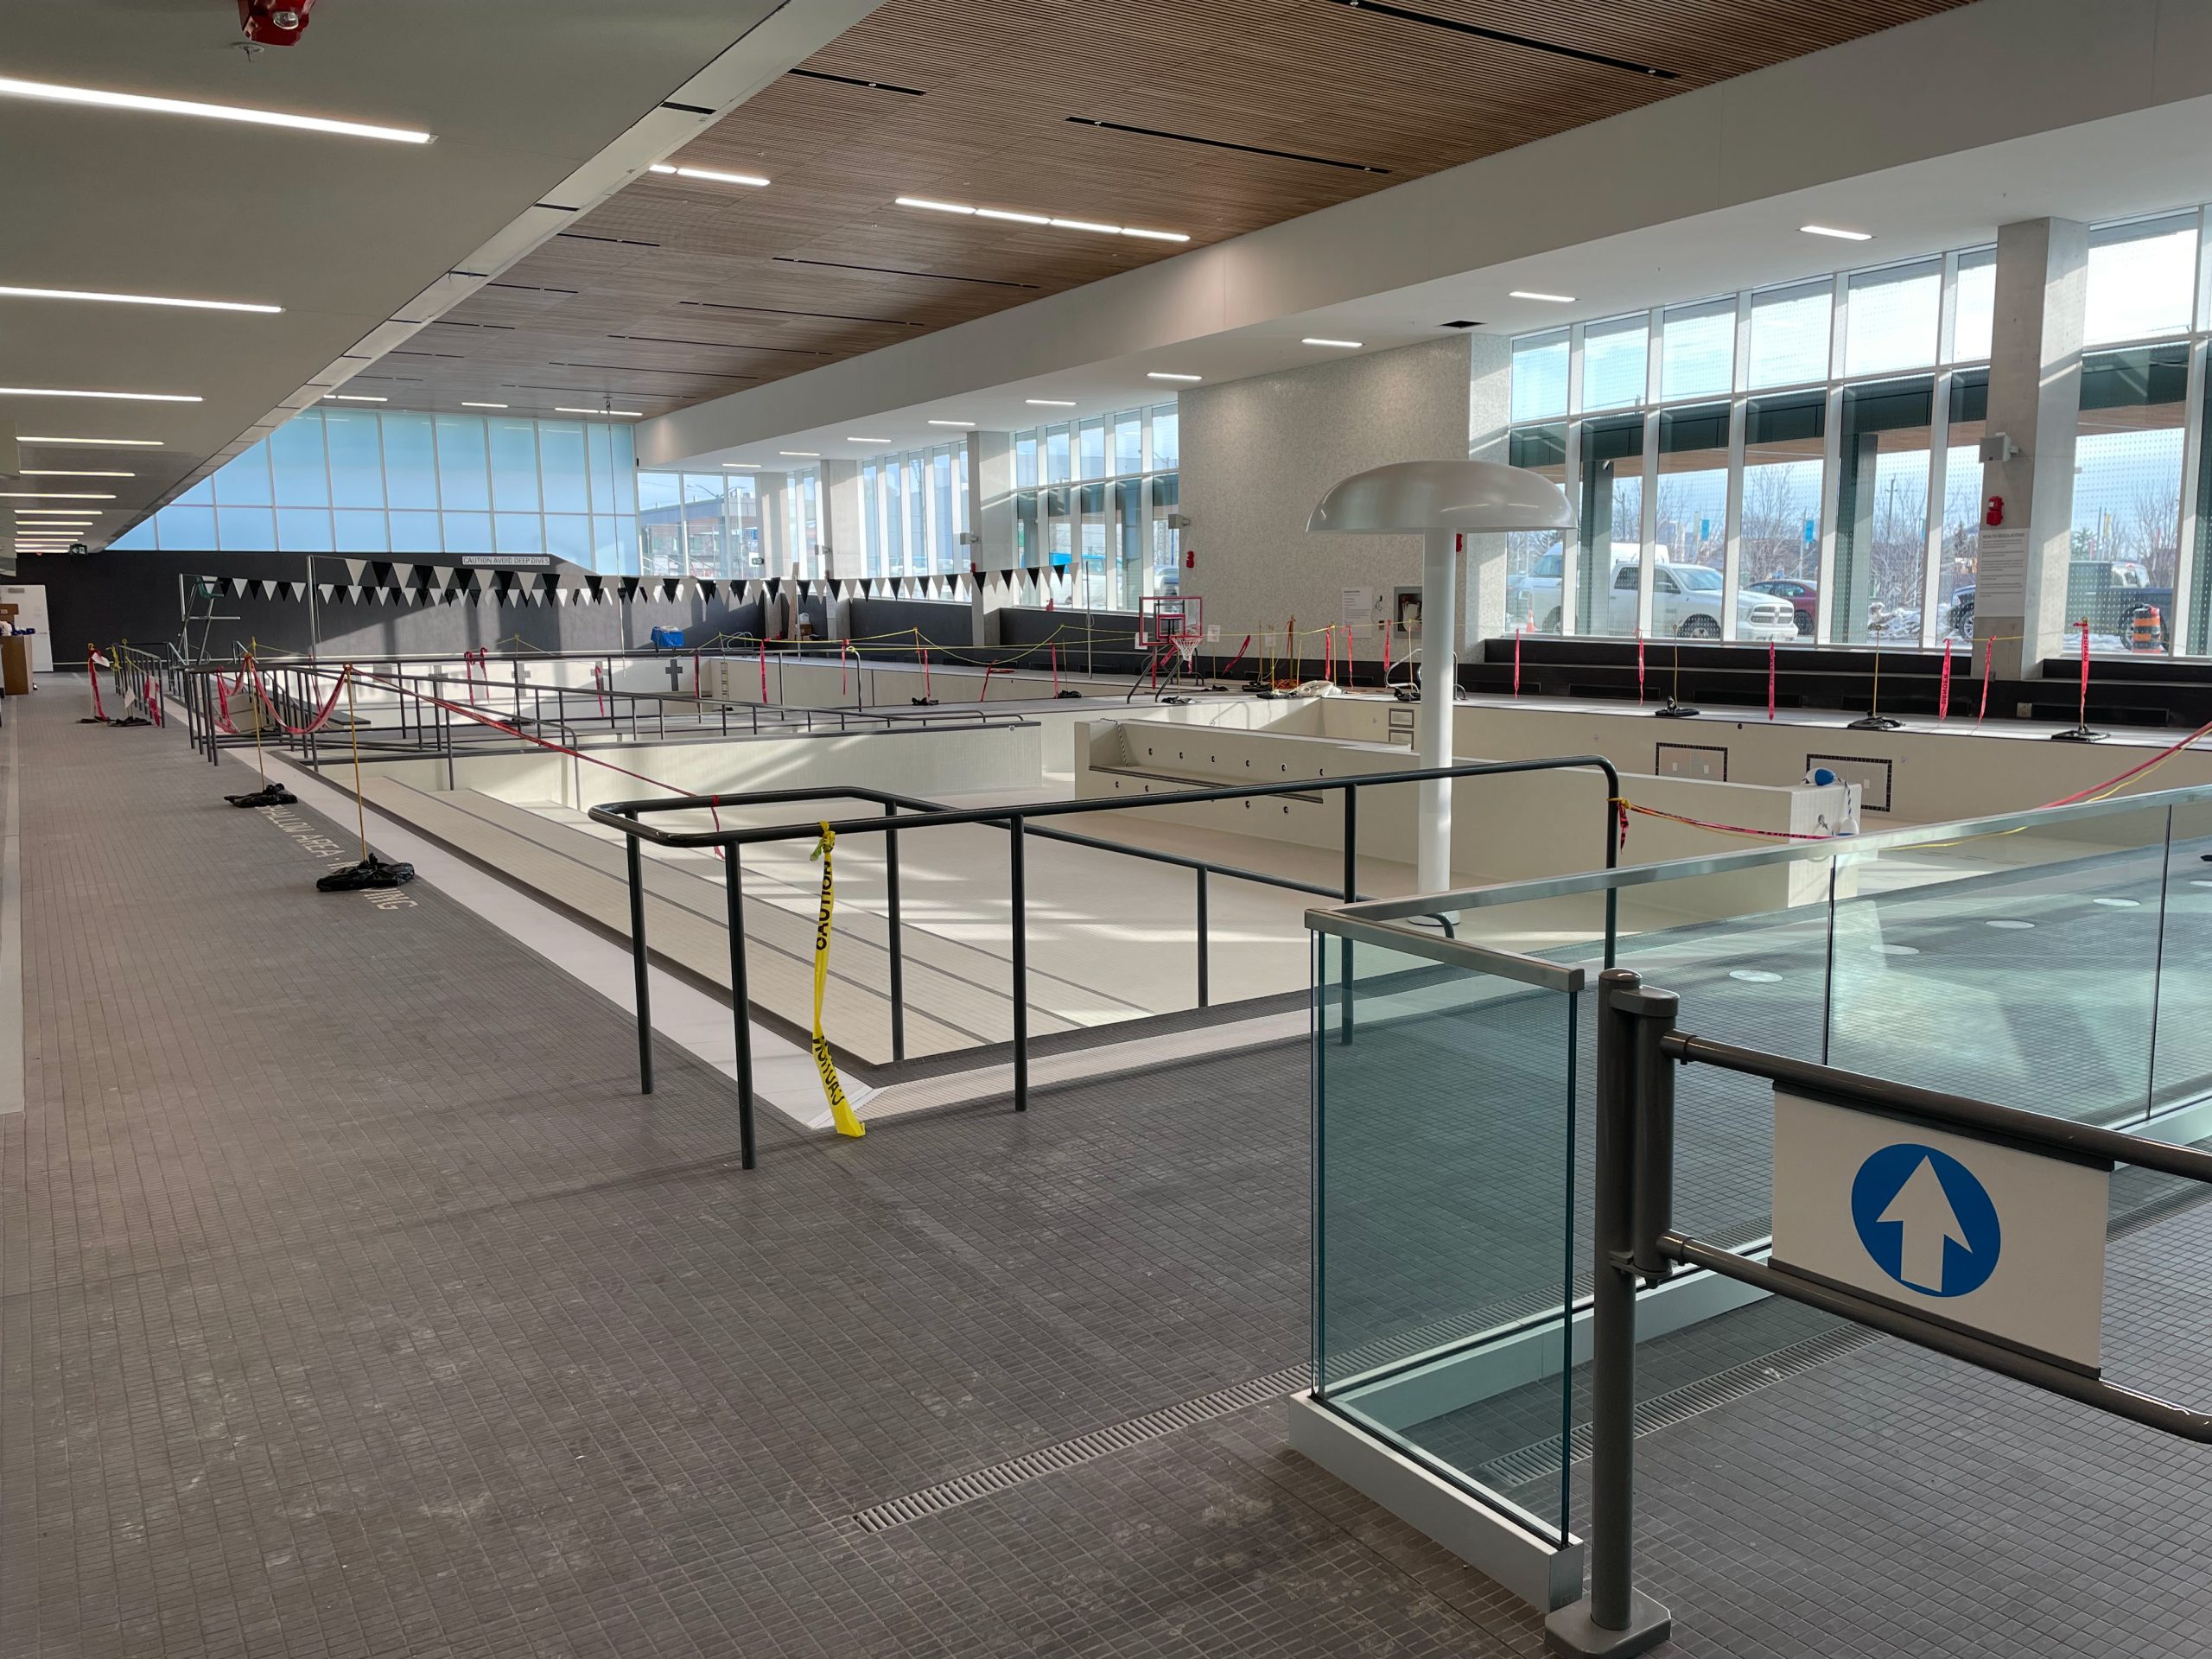 A photograph of the interior swimming pool area of the new Ethennonnhawahstihnen' Community Recreation Centre & Library while under construction, which shows an empty leisure pool with a water play feature in the foreground. 